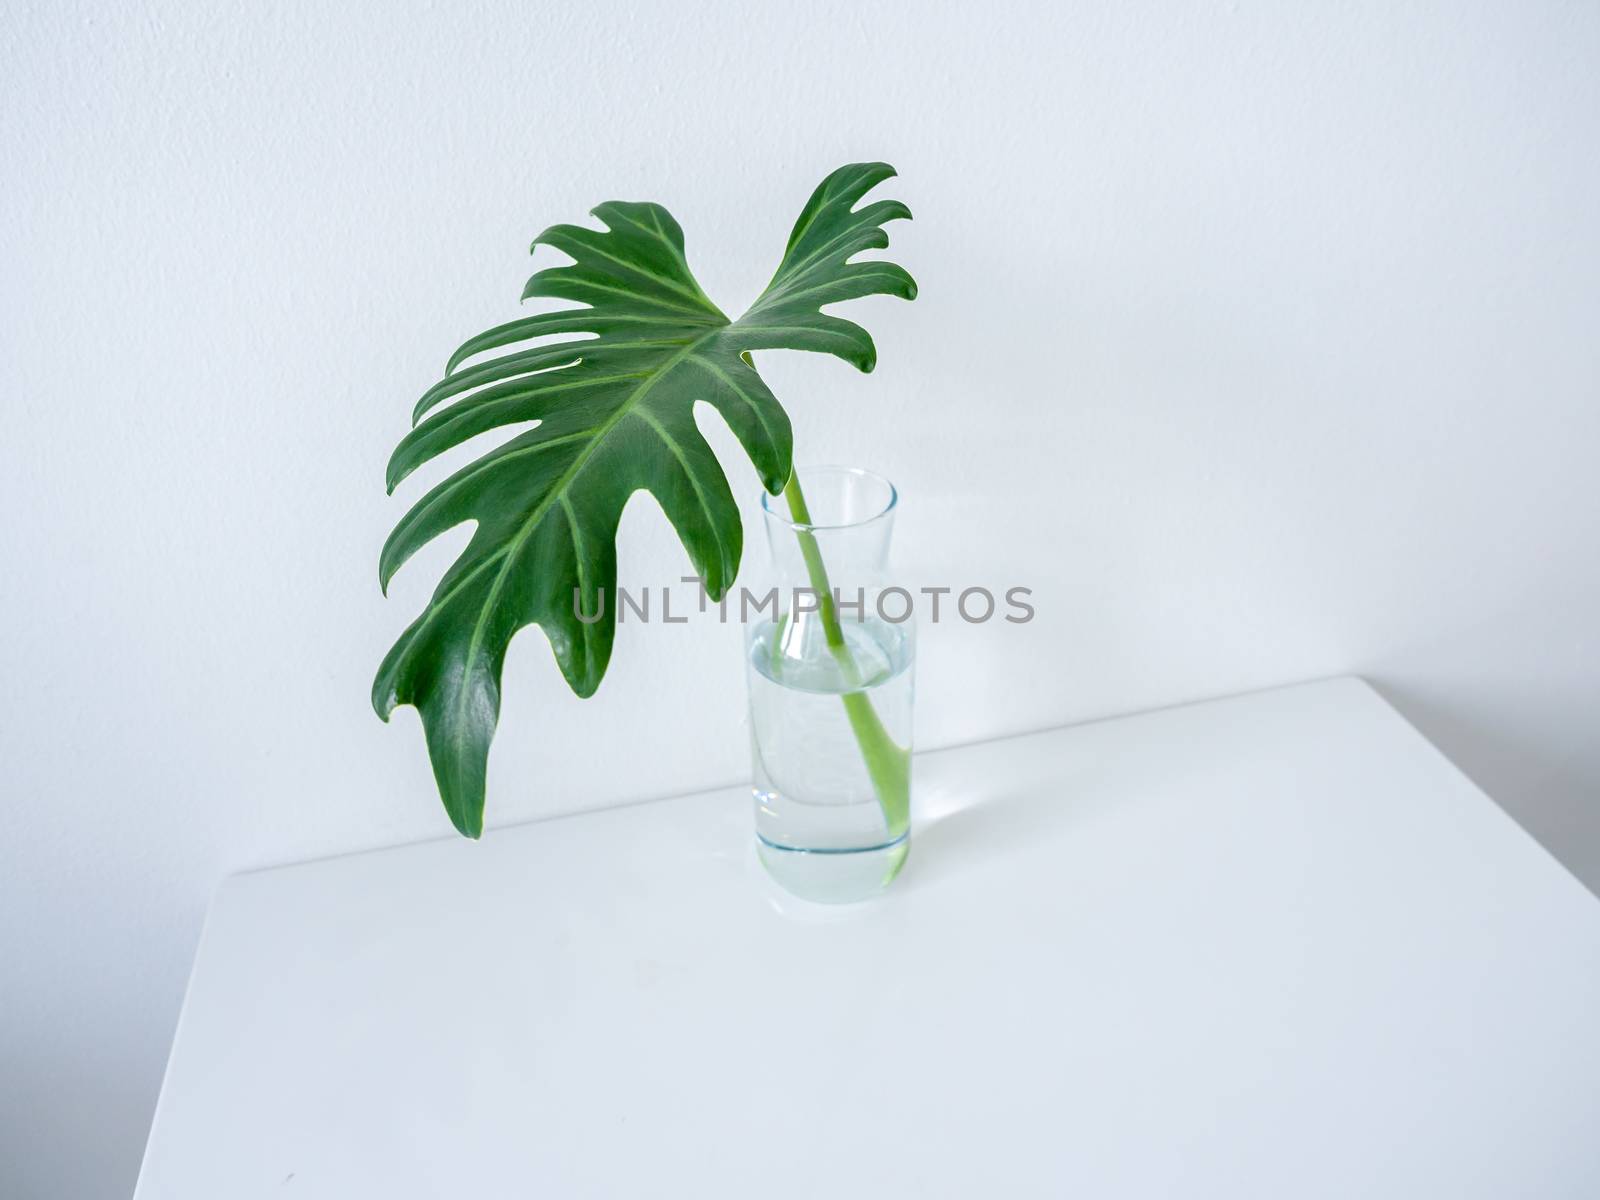 White cafe decoration minimal style. Tropical palm leaf in glass bottle white table with copy space.